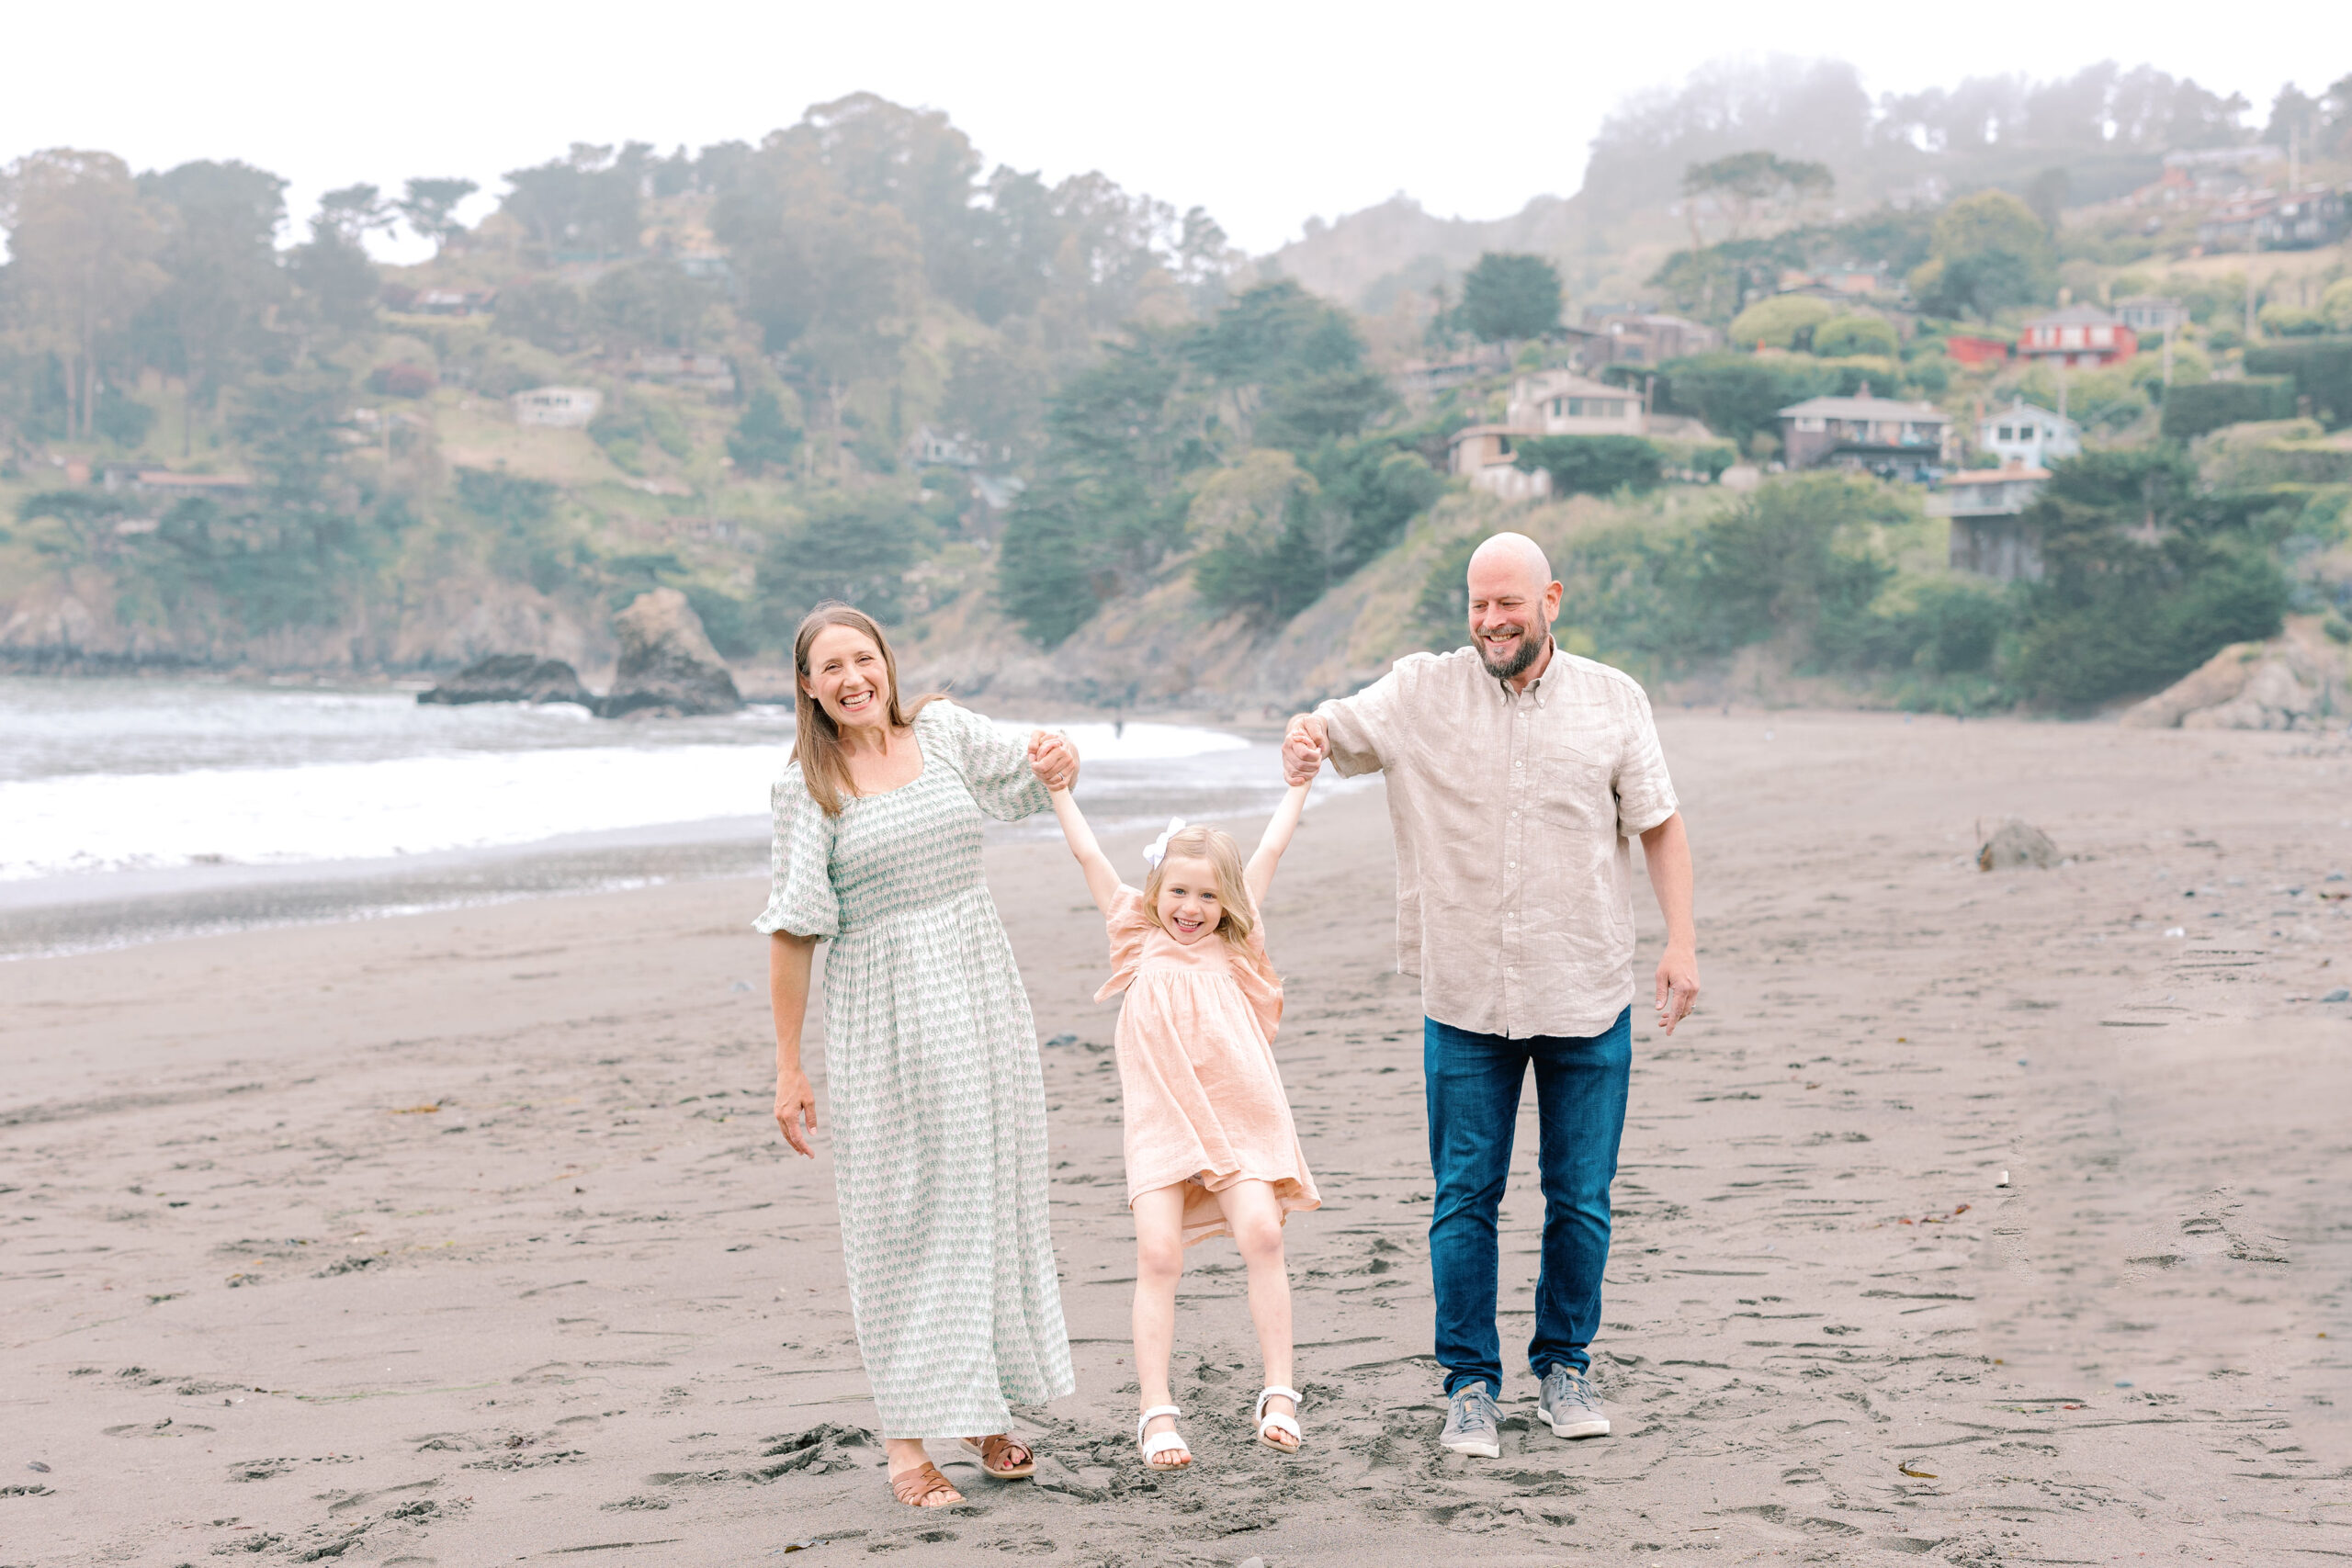 Bay Area wedding photographer captures family walking on beach together